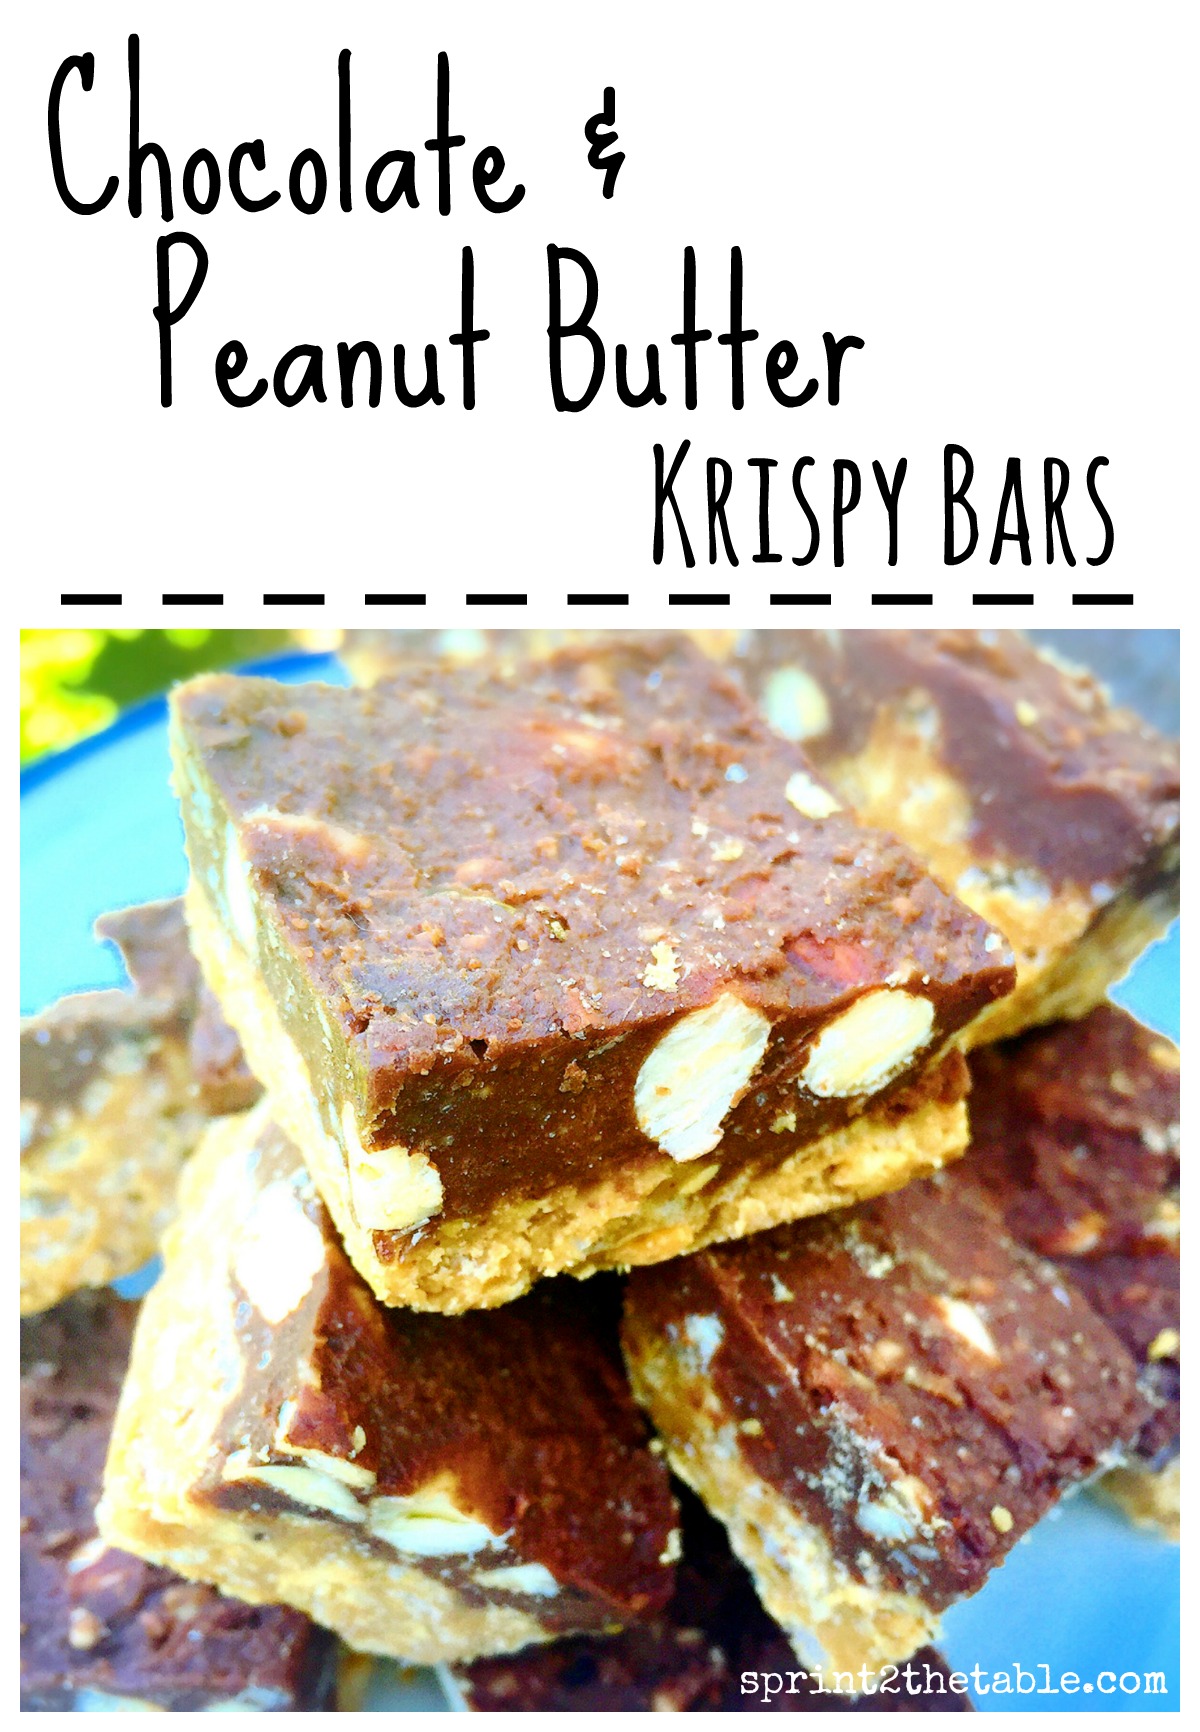 Chocolate & Peanut Butter Squares - it's like if Reeses and Crunch bars had a healthier baby.